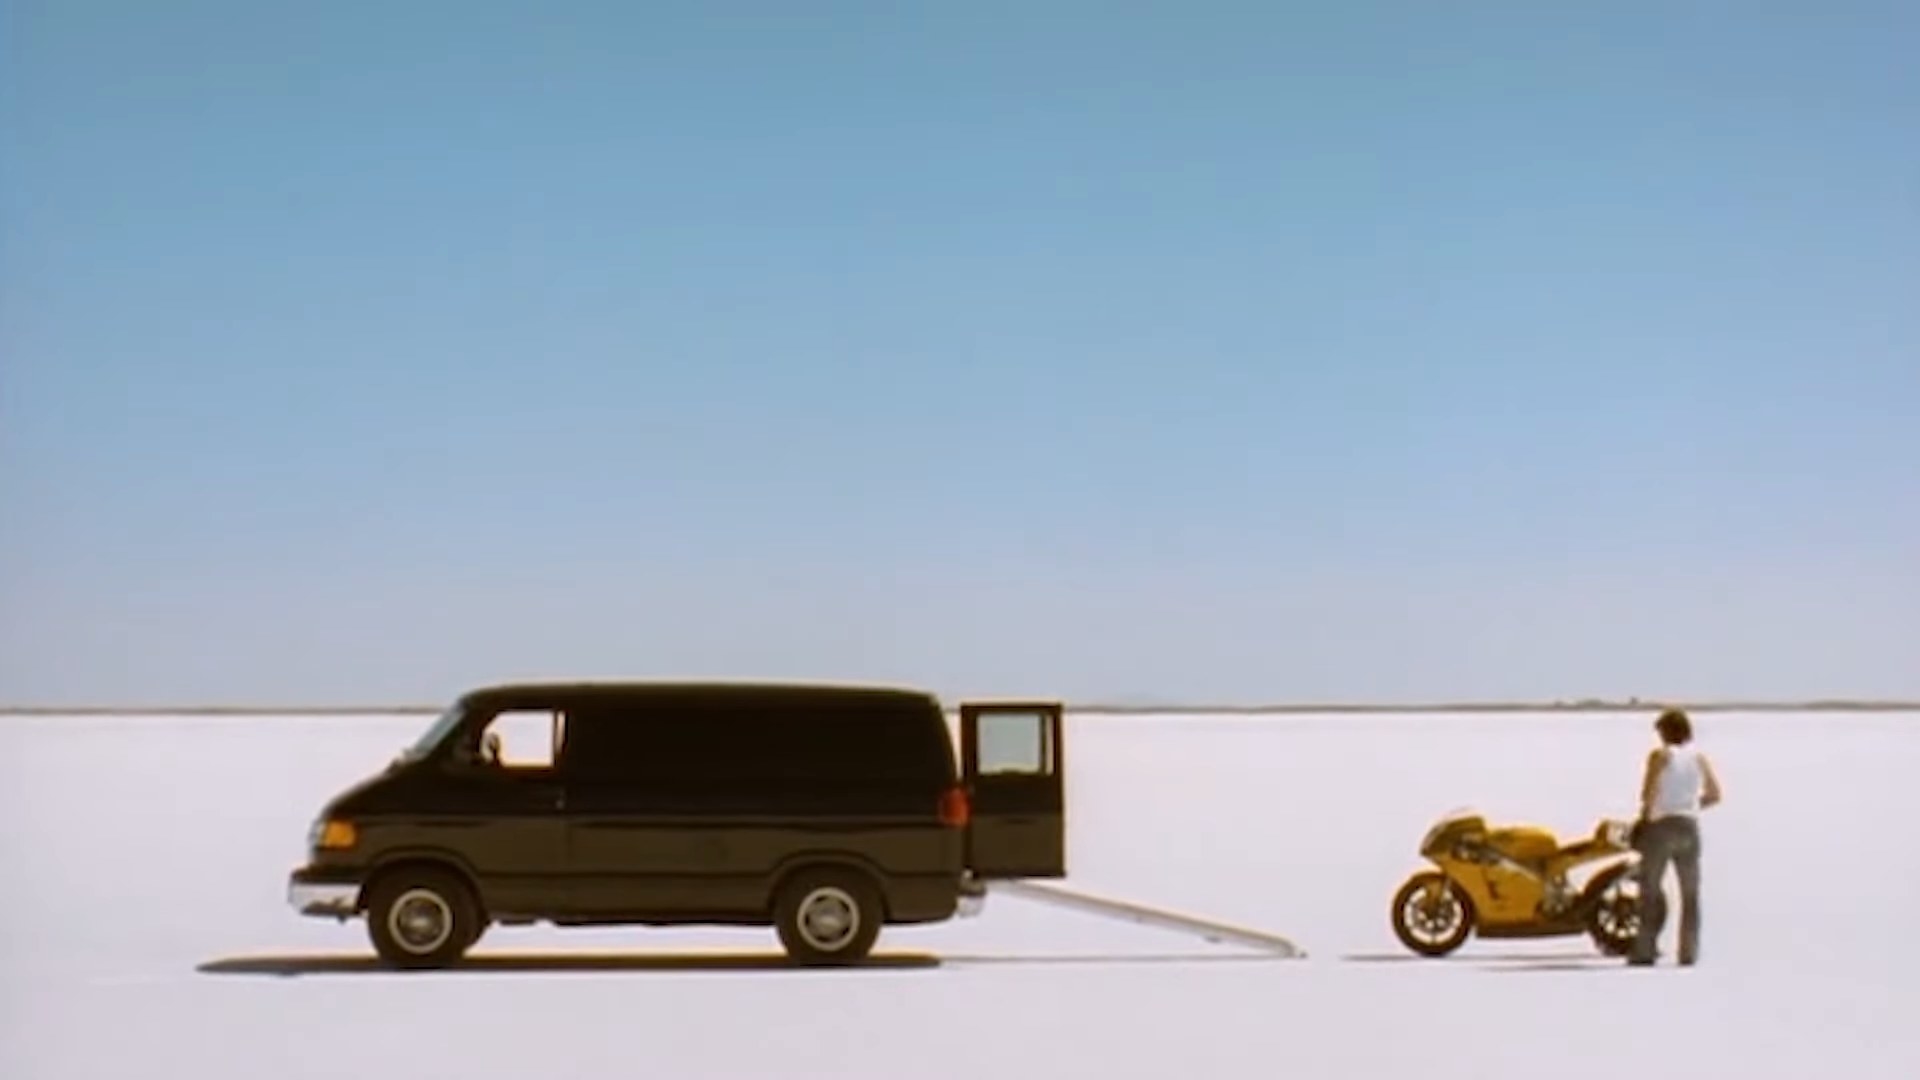 Bud standing by his motorcycle with an open van next to him in &quot;The Brown Bunny&quot;